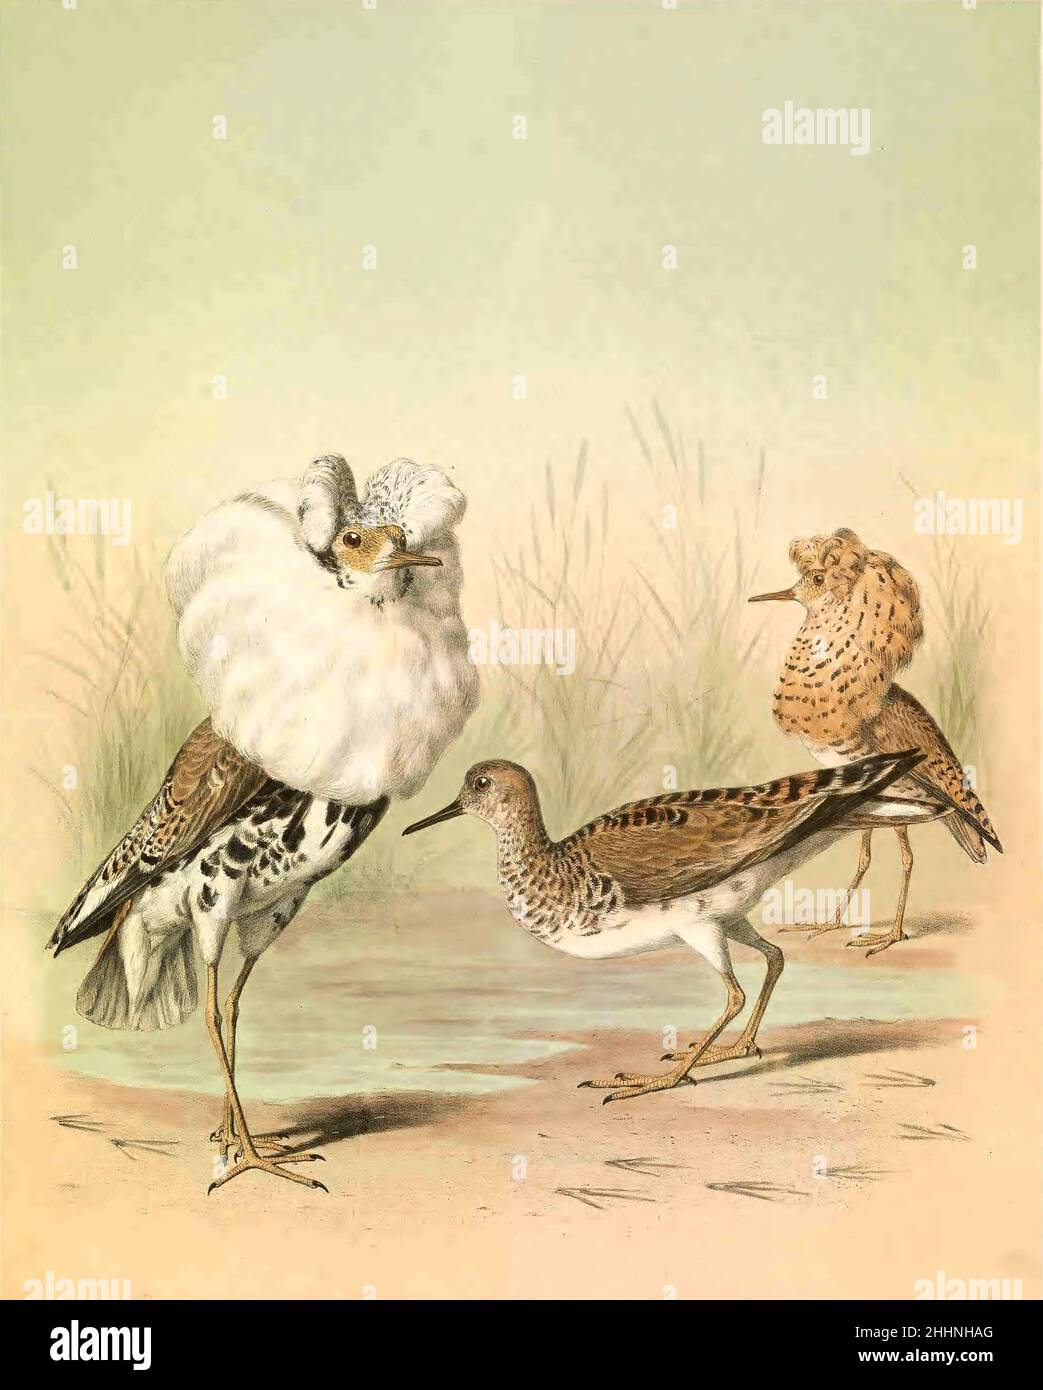 The ruff (Calidris pugnax Here as Machetes pugnax) is a medium-sized wading bird that breeds in marshes and wet meadows across northern Eurasia. This highly gregarious sandpiper is migratory and sometimes forms huge flocks in its winter grounds, which include southern and western Europe, Africa, southern Asia and Australia. tinted lithograph Illustrated by Joseph Smit, from the book ' The beautiful and curious birds of the world ' by Charles Barney Cory, Published by the Author for the subscribers Boston USA 1883. Plates are tinted lithographs, some with additional hand-coloring Stock Photo